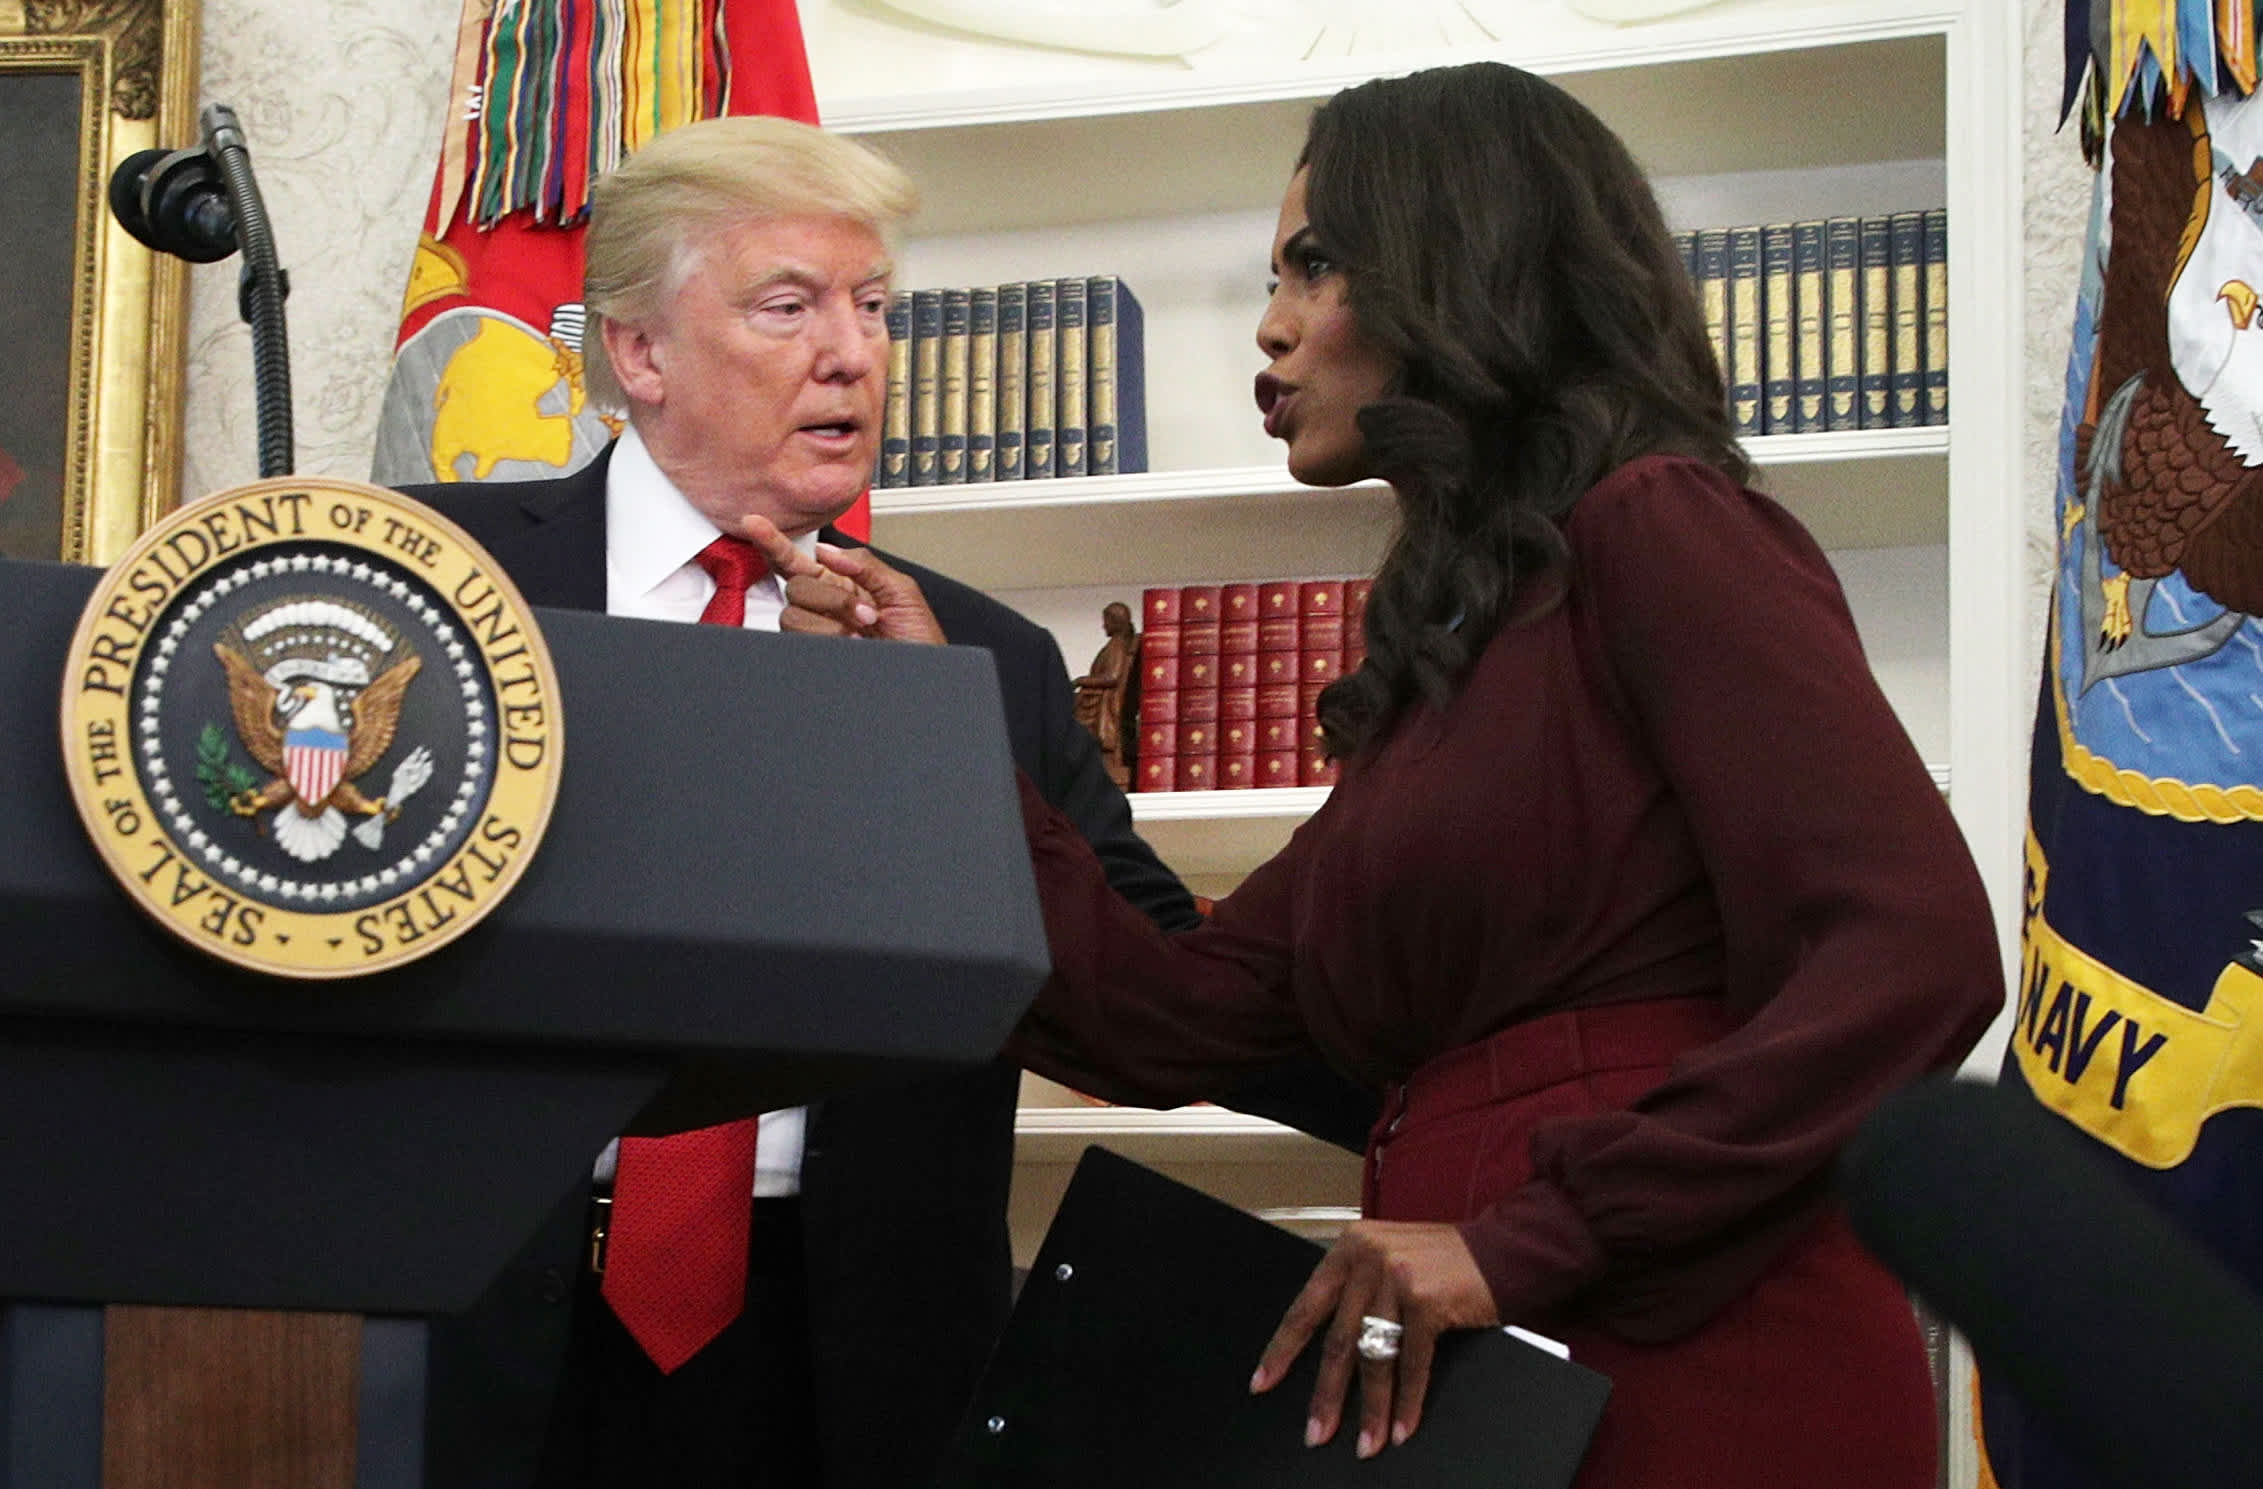 Omarosa pictures of 